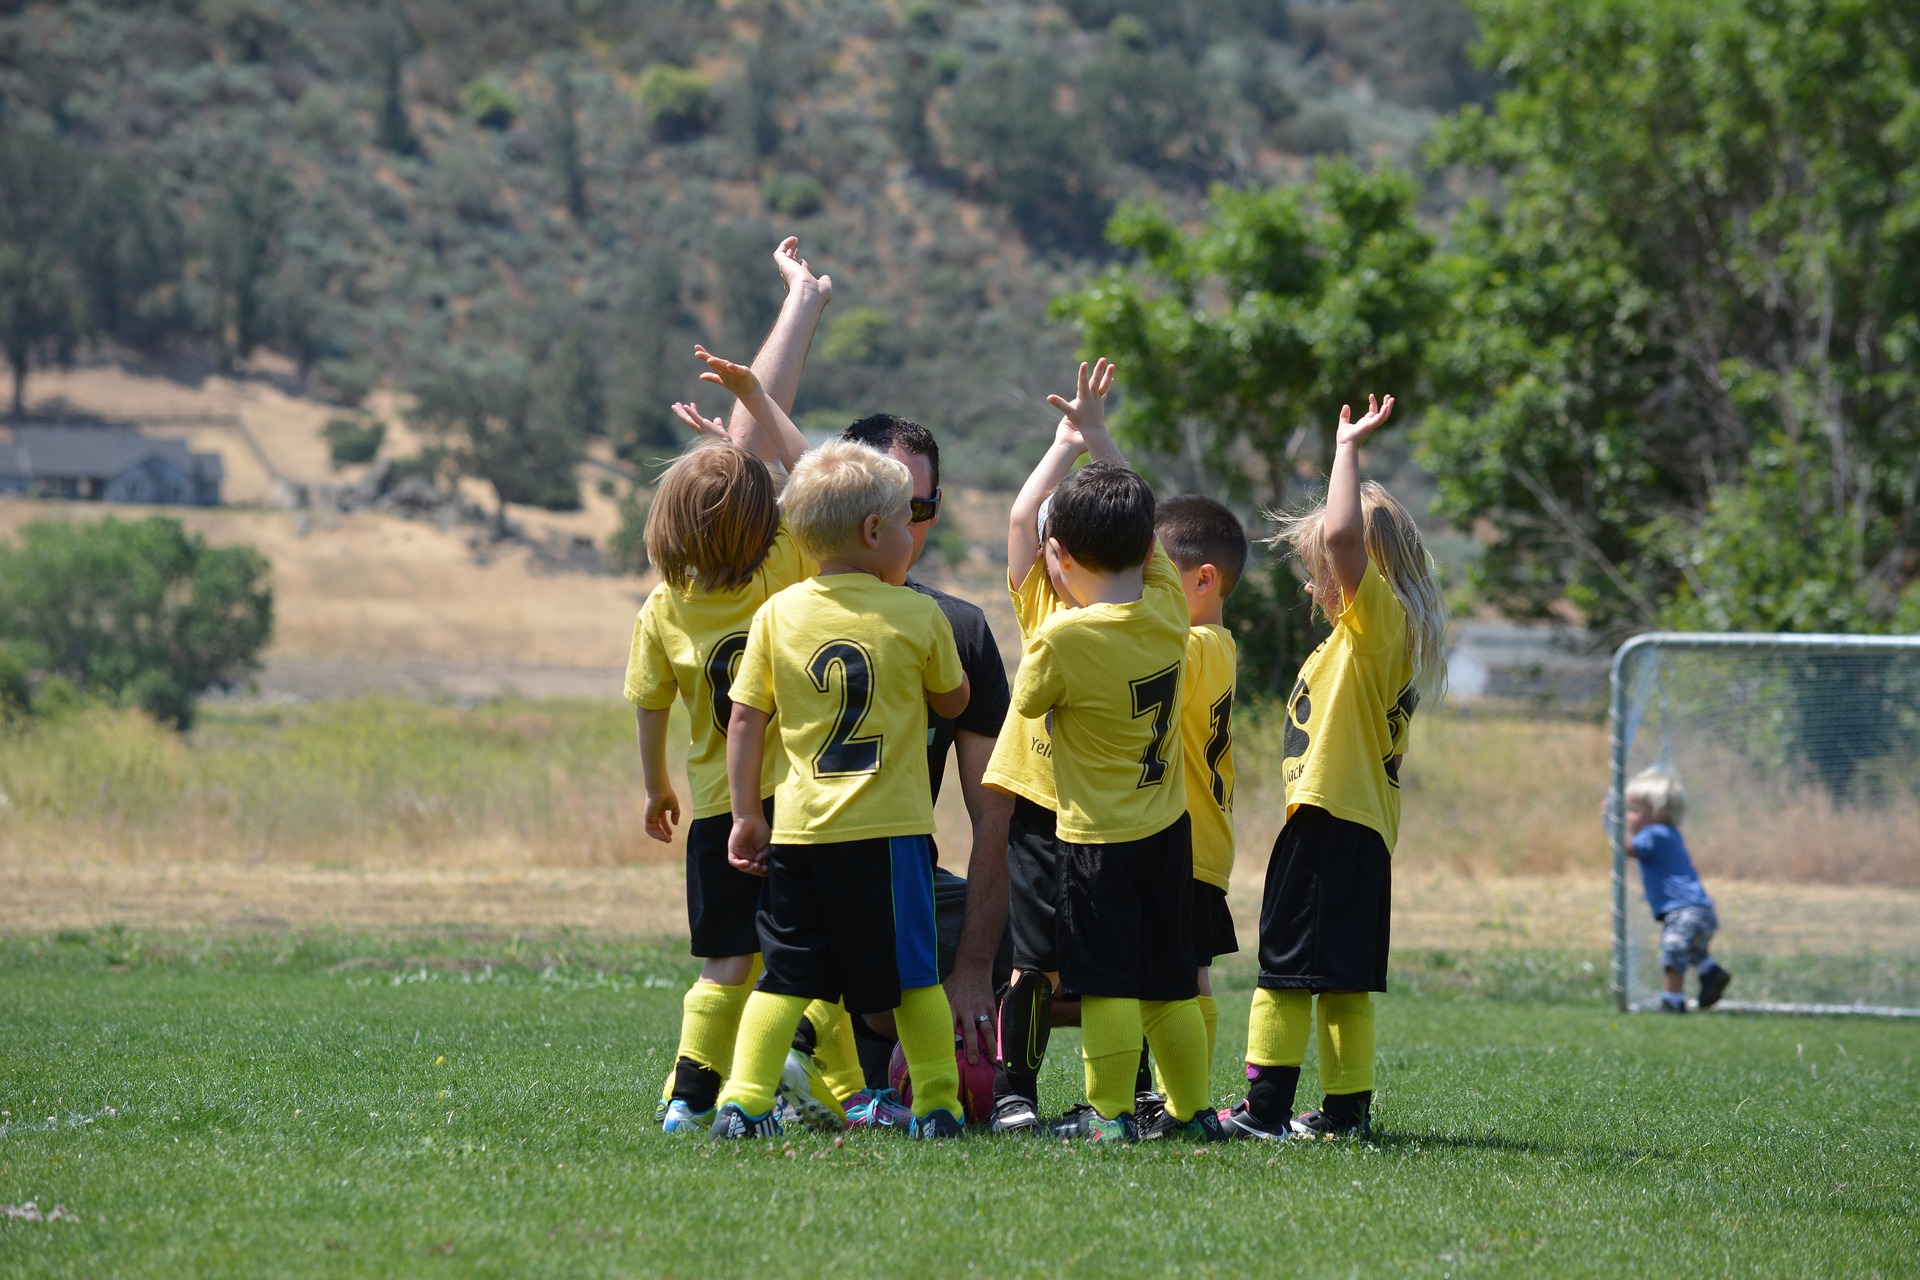 Benefits of Playing Soccer for Children